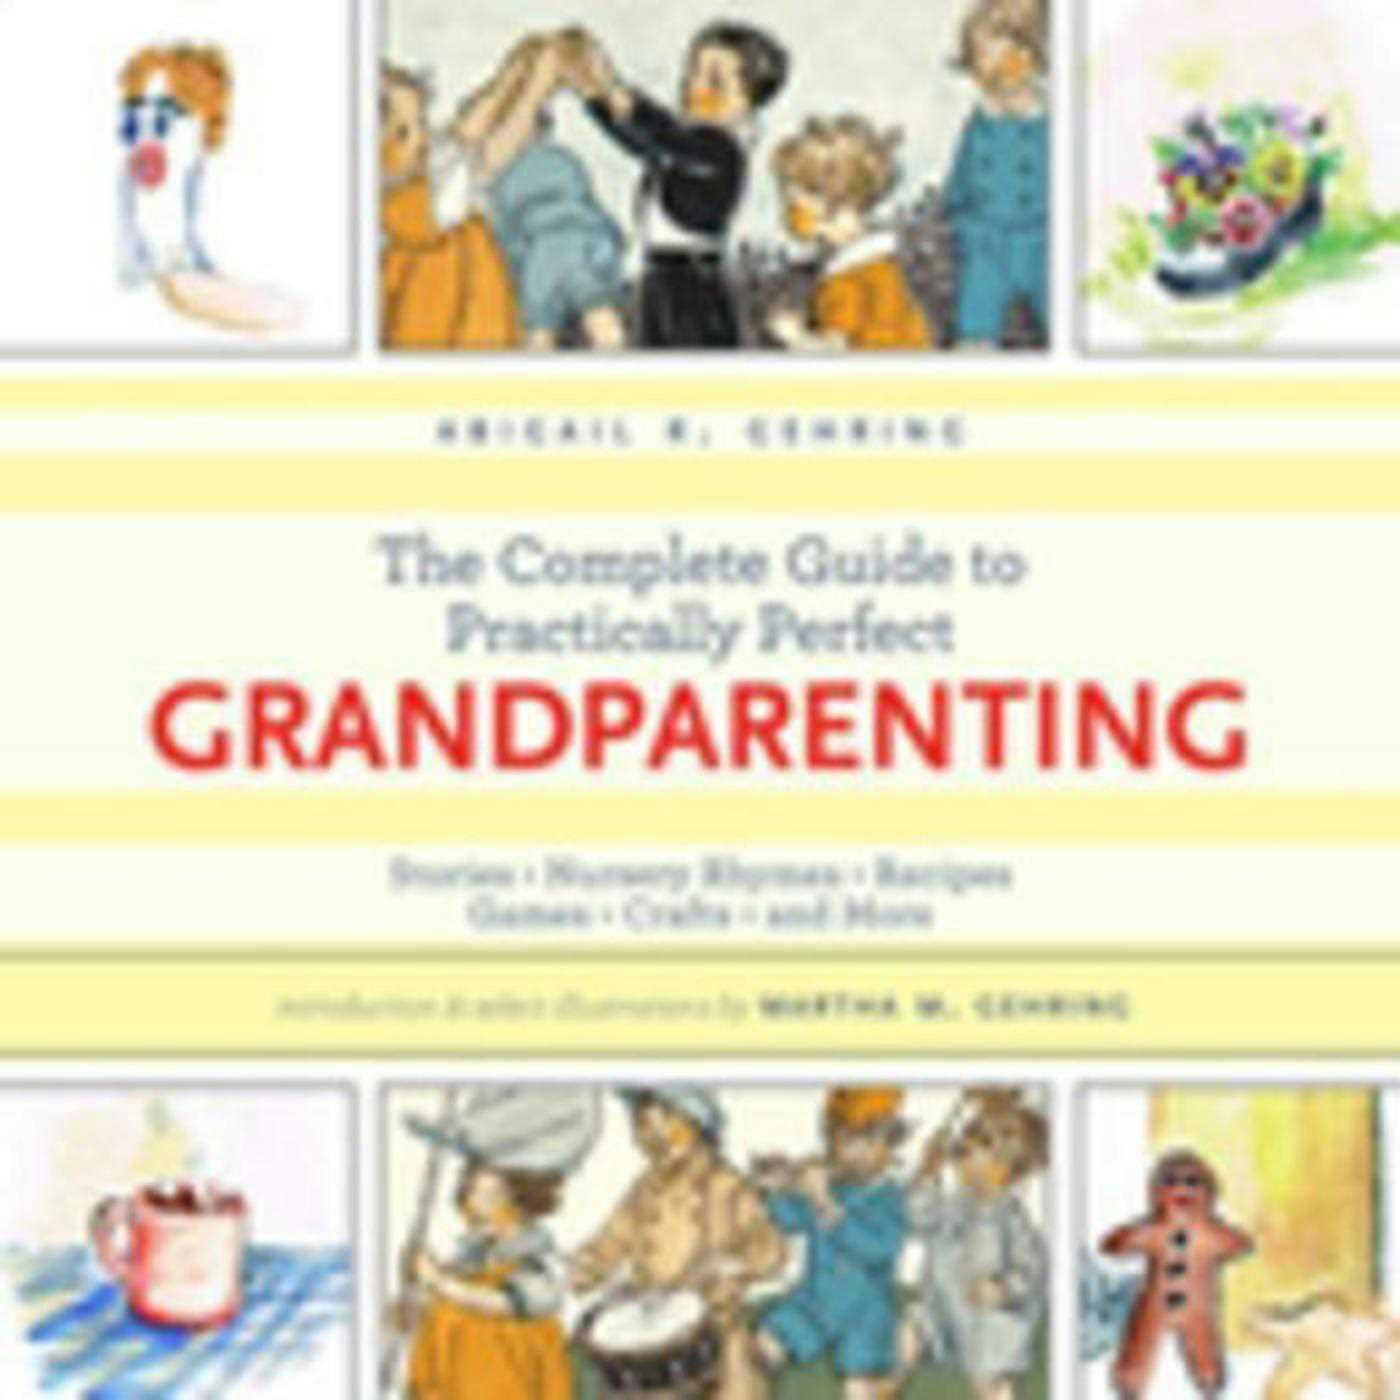 The Complete Guide to Practically Perfect Grandparenting: Stories, Nursery Rhymes, Recipes, Games, Crafts and More - Abigail Gehring